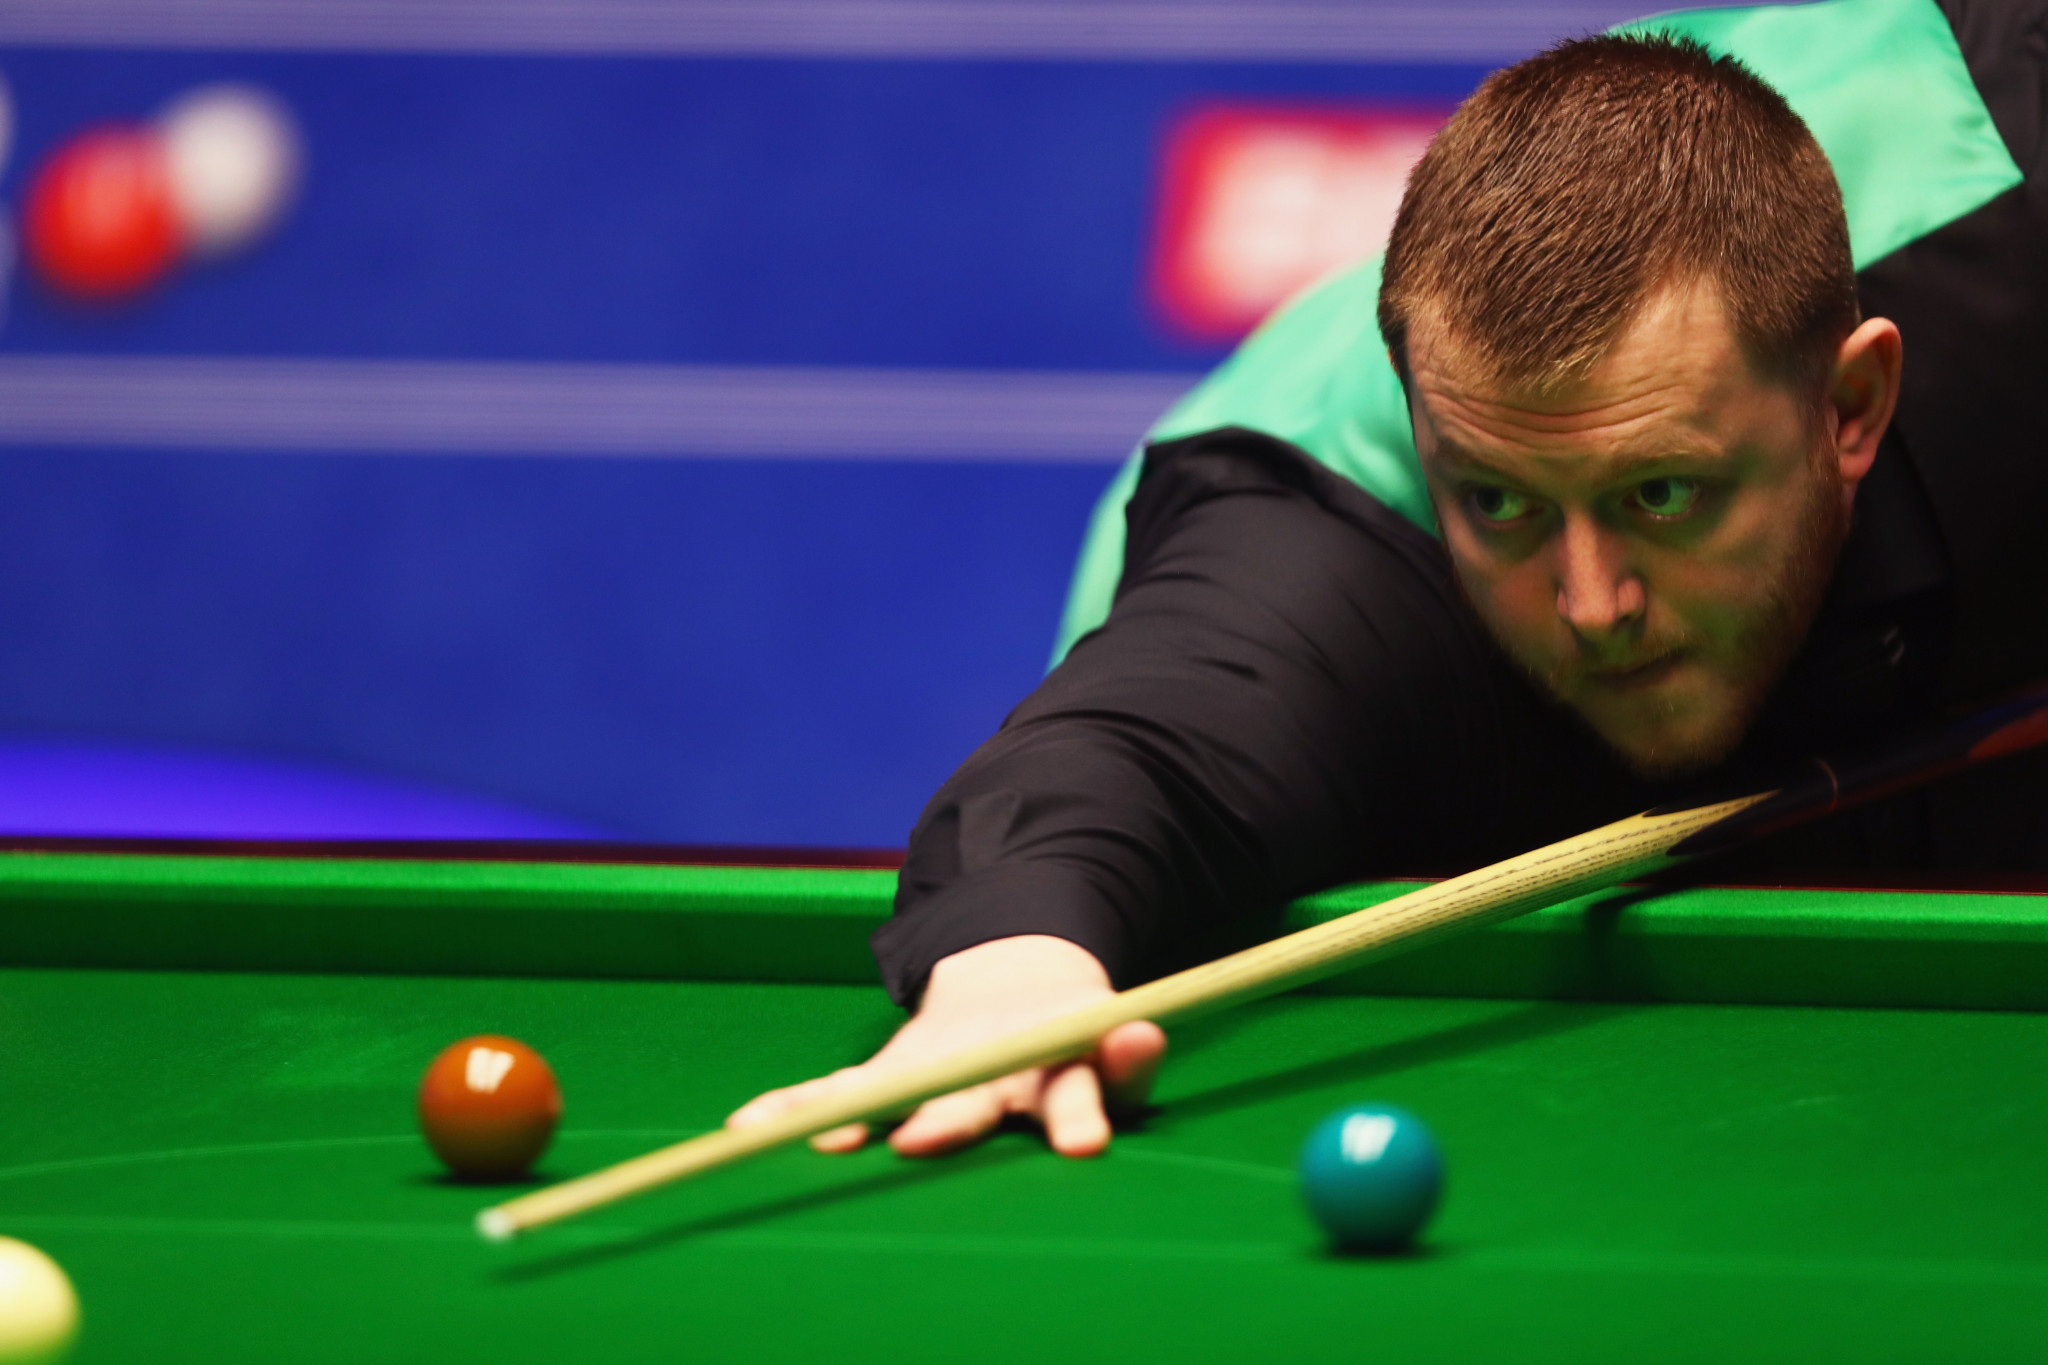 Fourth seed Mark Allen became the highest profile casualty of the World Snooker Championship so far after he lost to Wales' Jamie Clarke today ©Getty Images